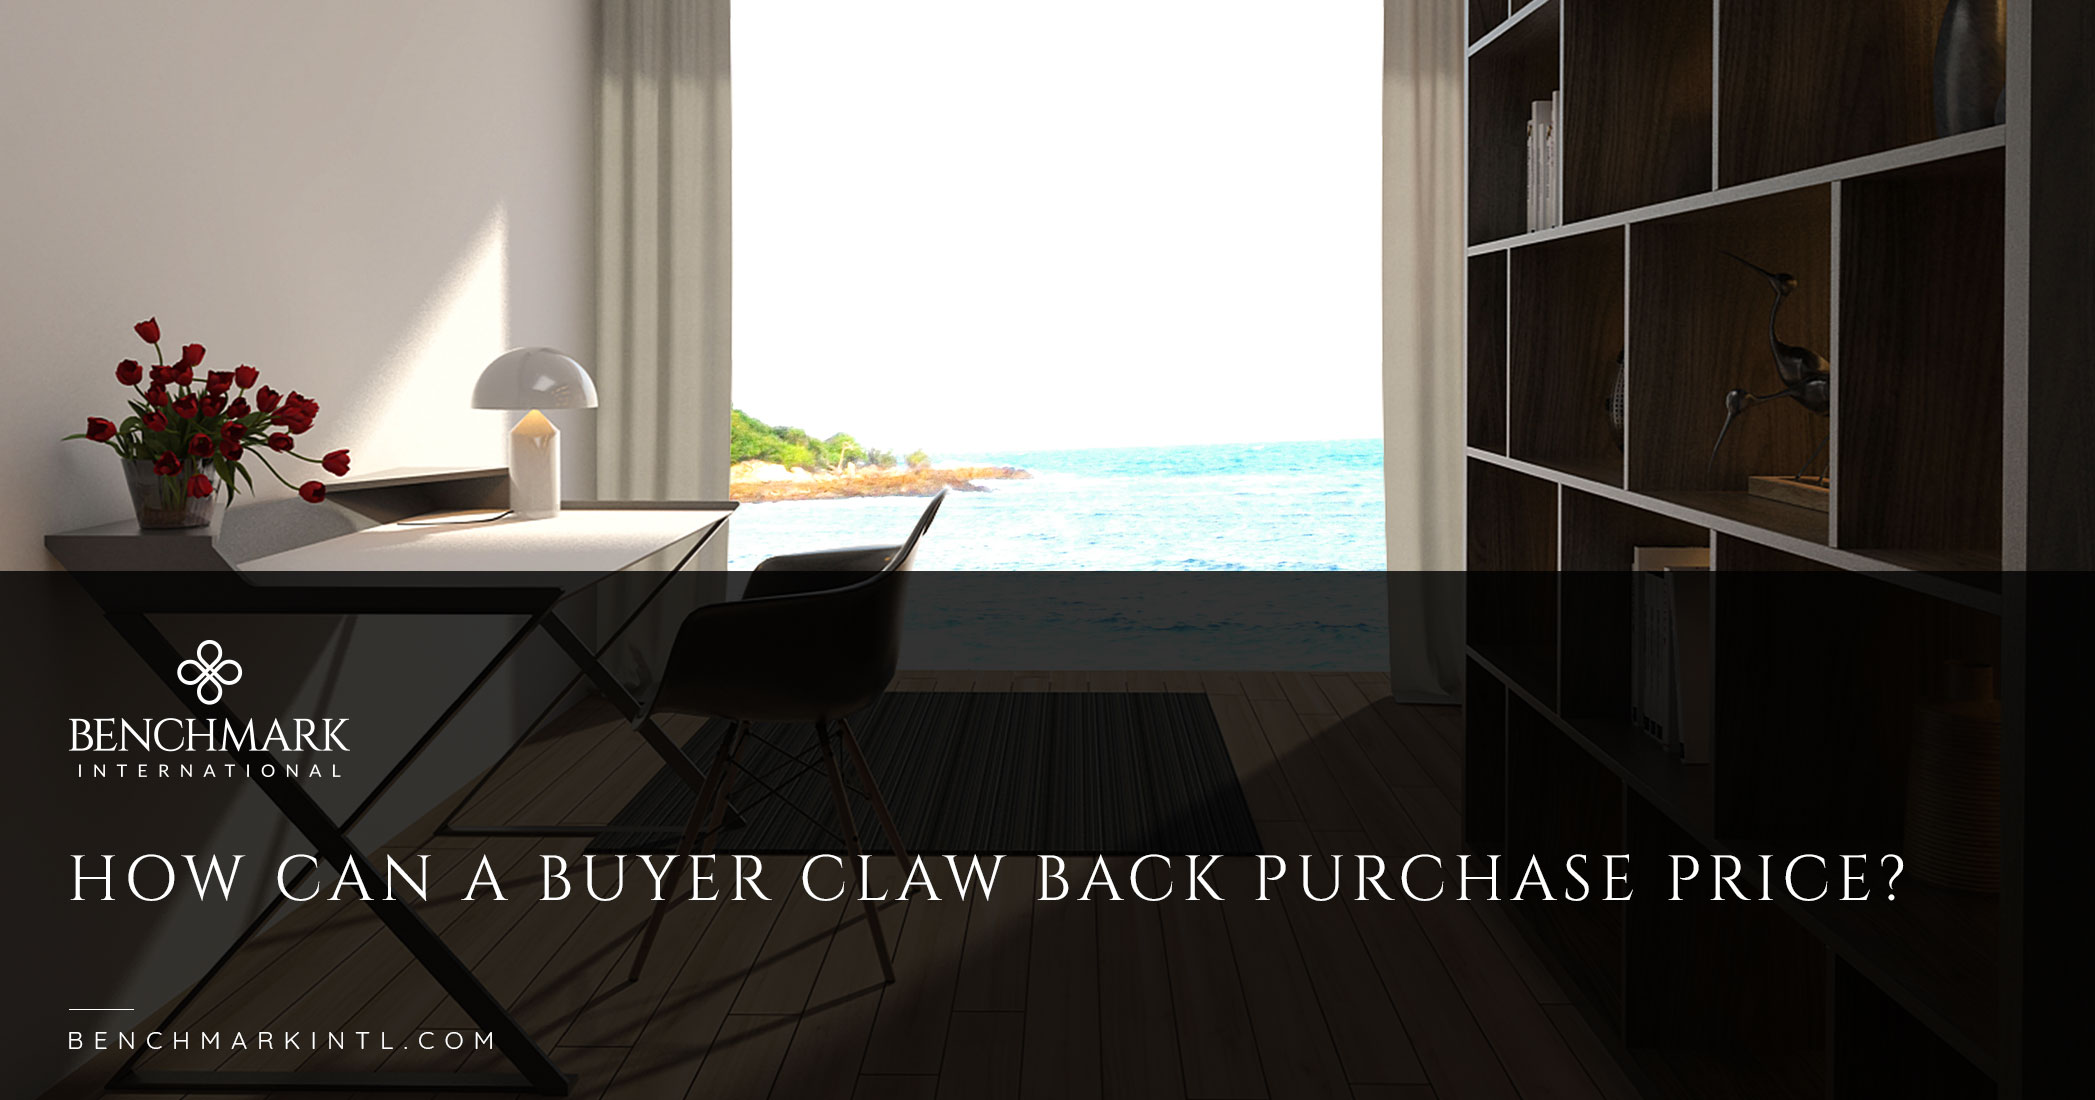 How Can A Buyer Claw Back Purchase Price?